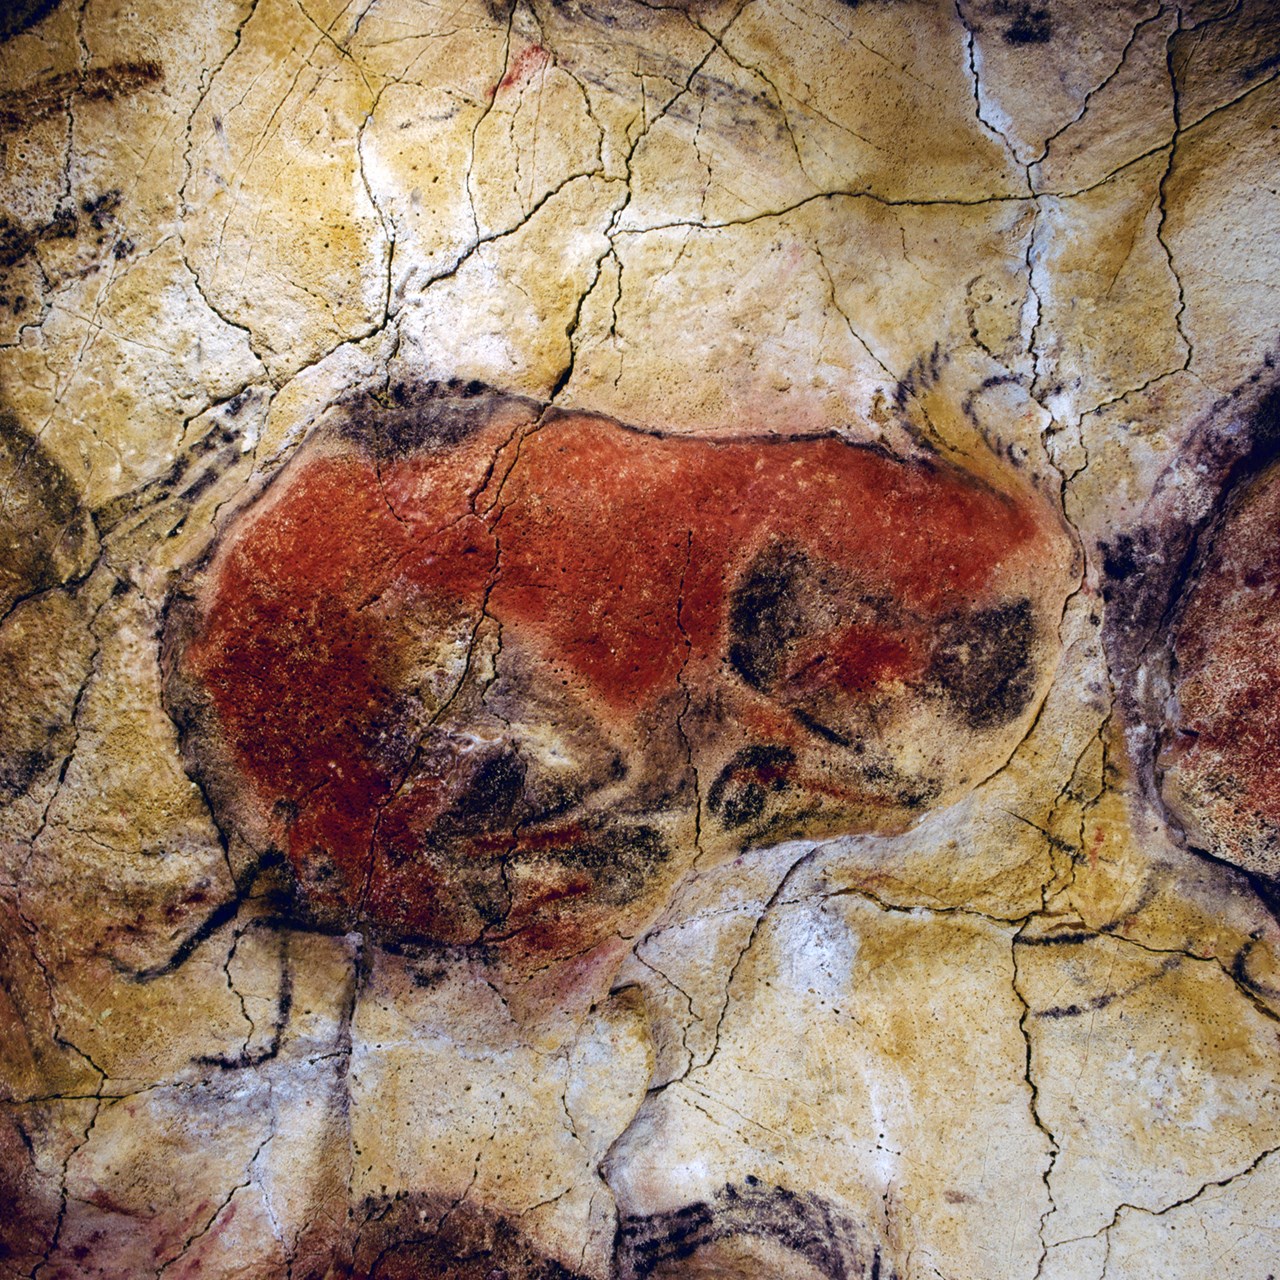 Bison The ceiling with the Polychrome Bison. Museo de Altamira. Photo P. Saura. https://www.bradshawfoundation.com/spain/altamira/index.php